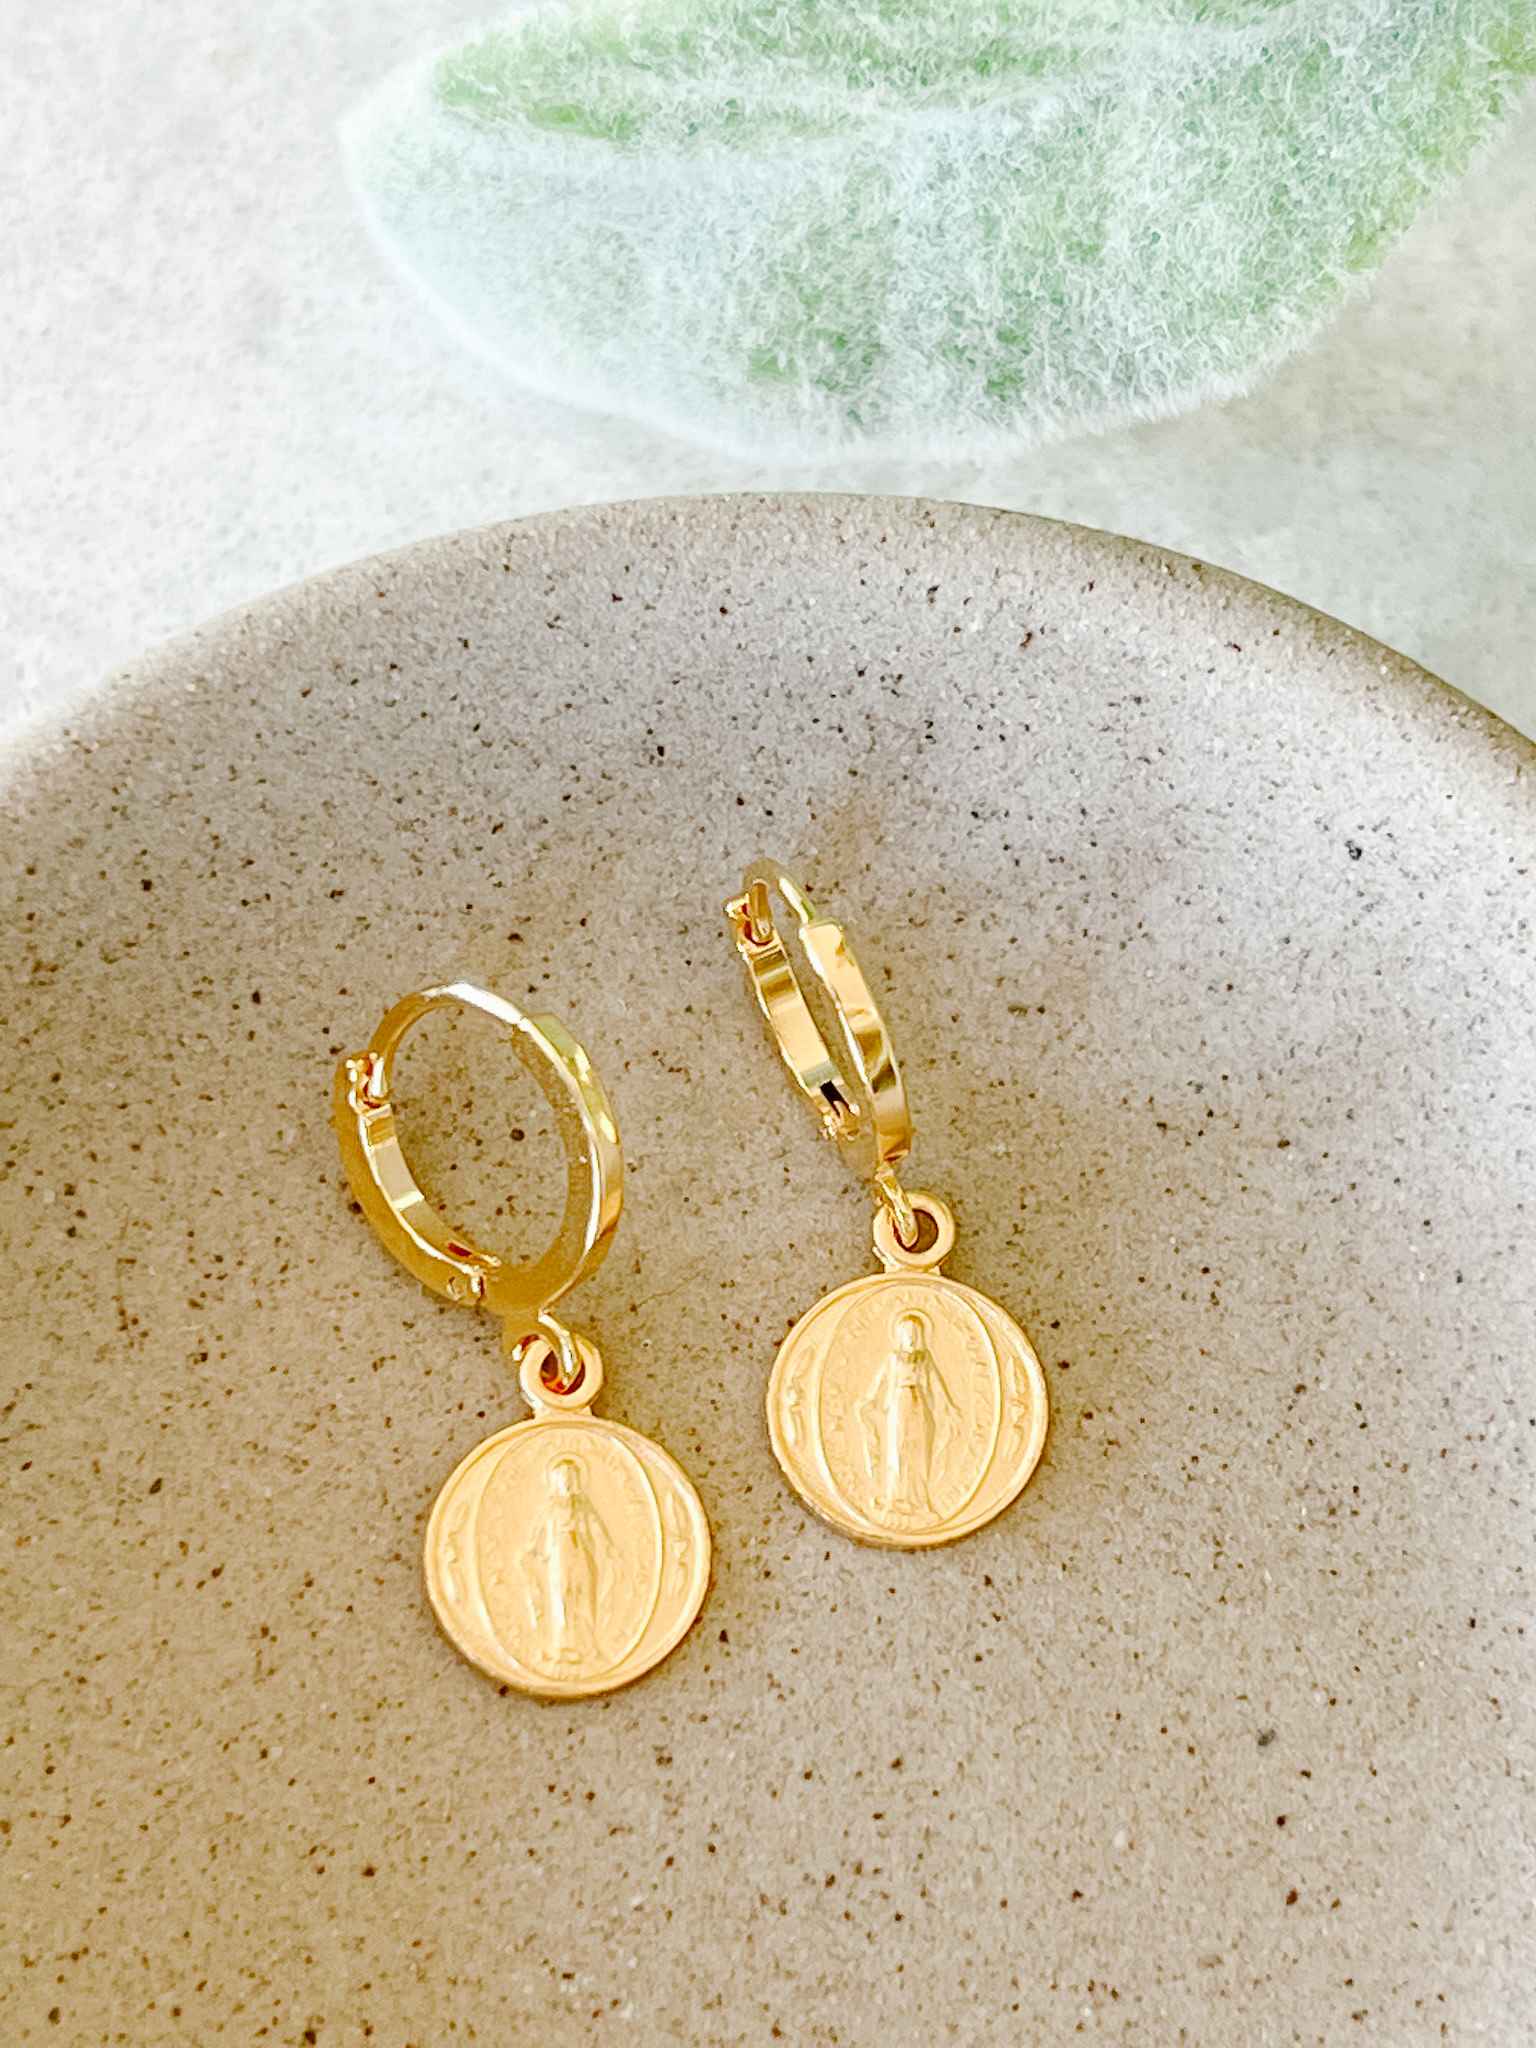 Miraculous Medal Earrings - Jewelry, Gold - Amano House of Joppa